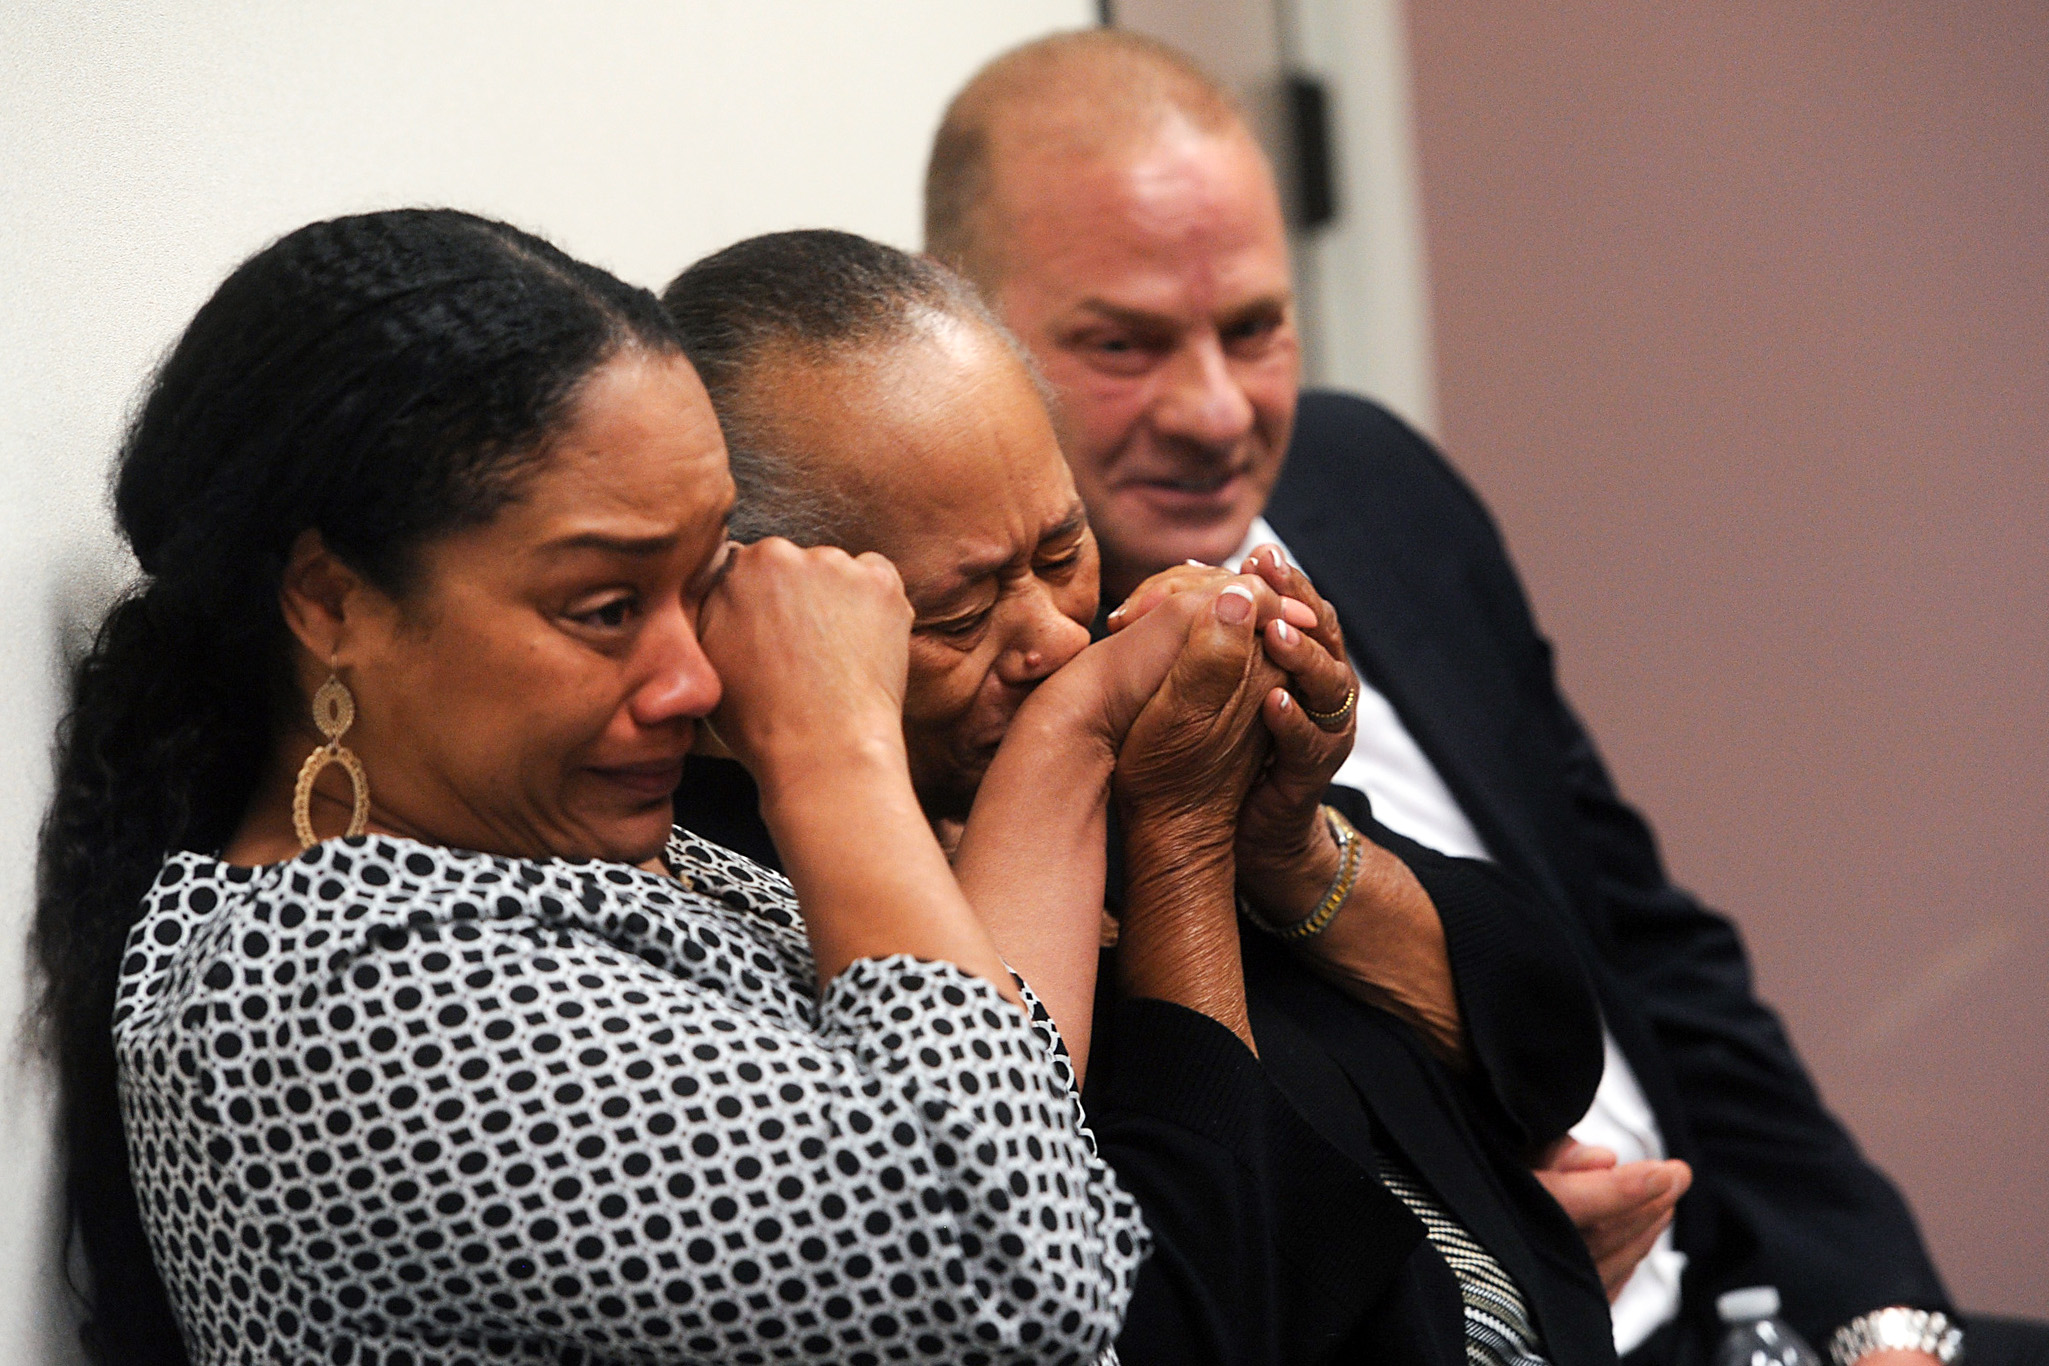 PHOTO: O.J. Simpson's daughter Arnelle Simpson, sister Shirley Baker and friend Tom Scotto react during Simpson's parole hearing at Lovelock Correctional Center, July 20, 2017 in Lovelock, Nev.